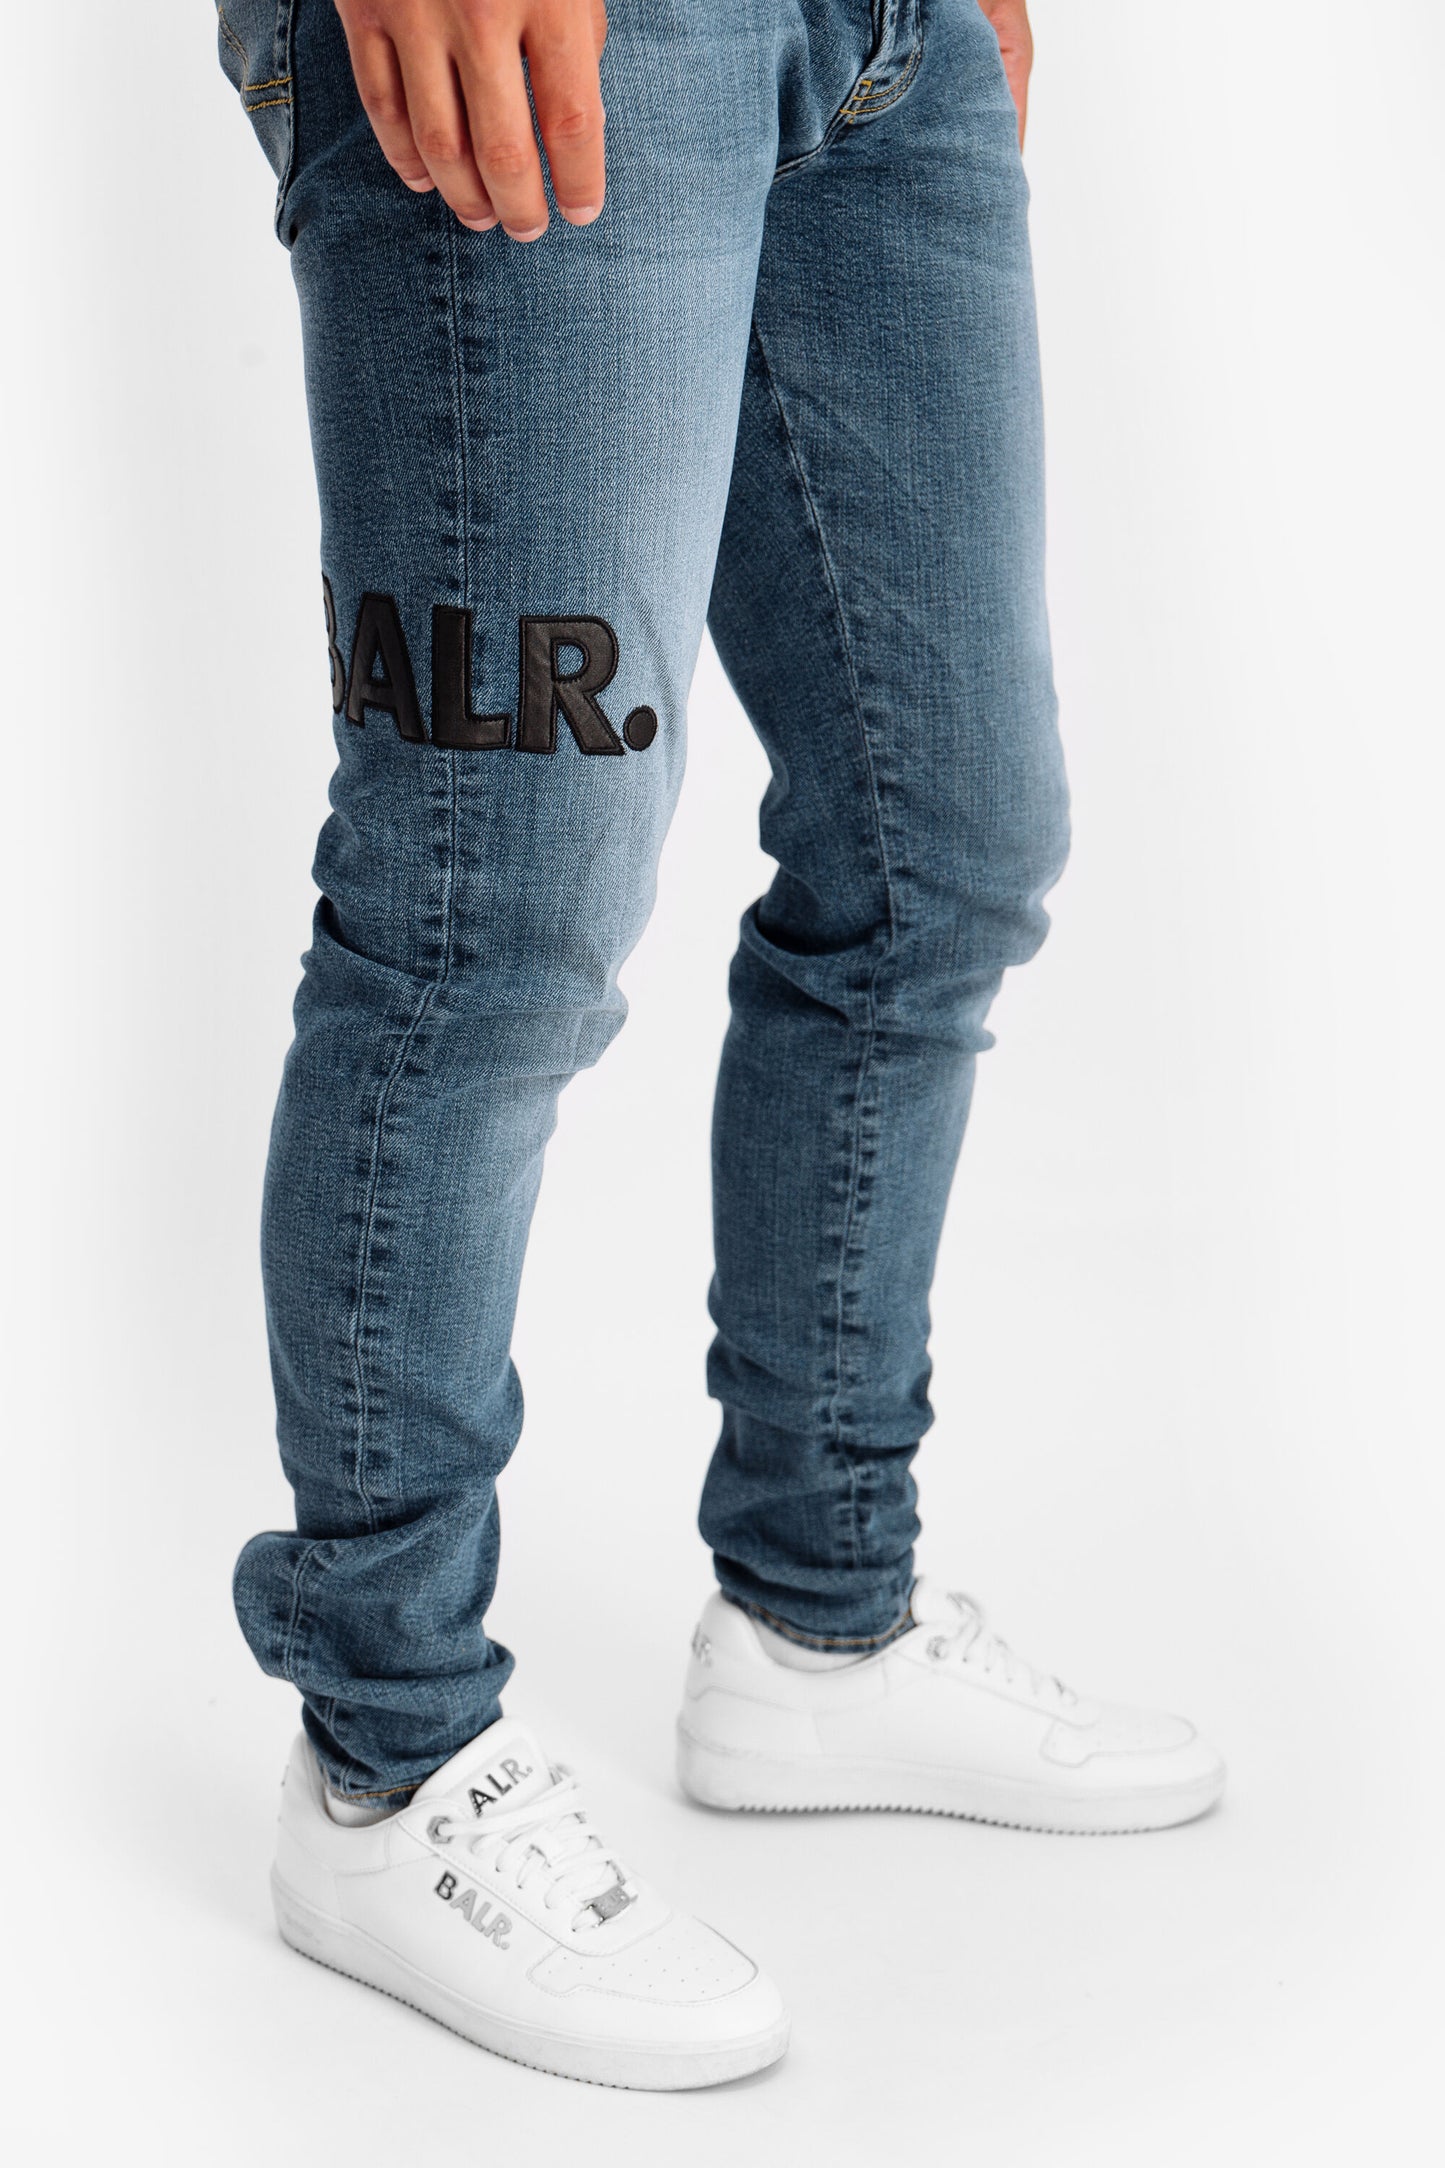 BALR. Leather Patch Mid Aged Jeans Slim Mid Aged